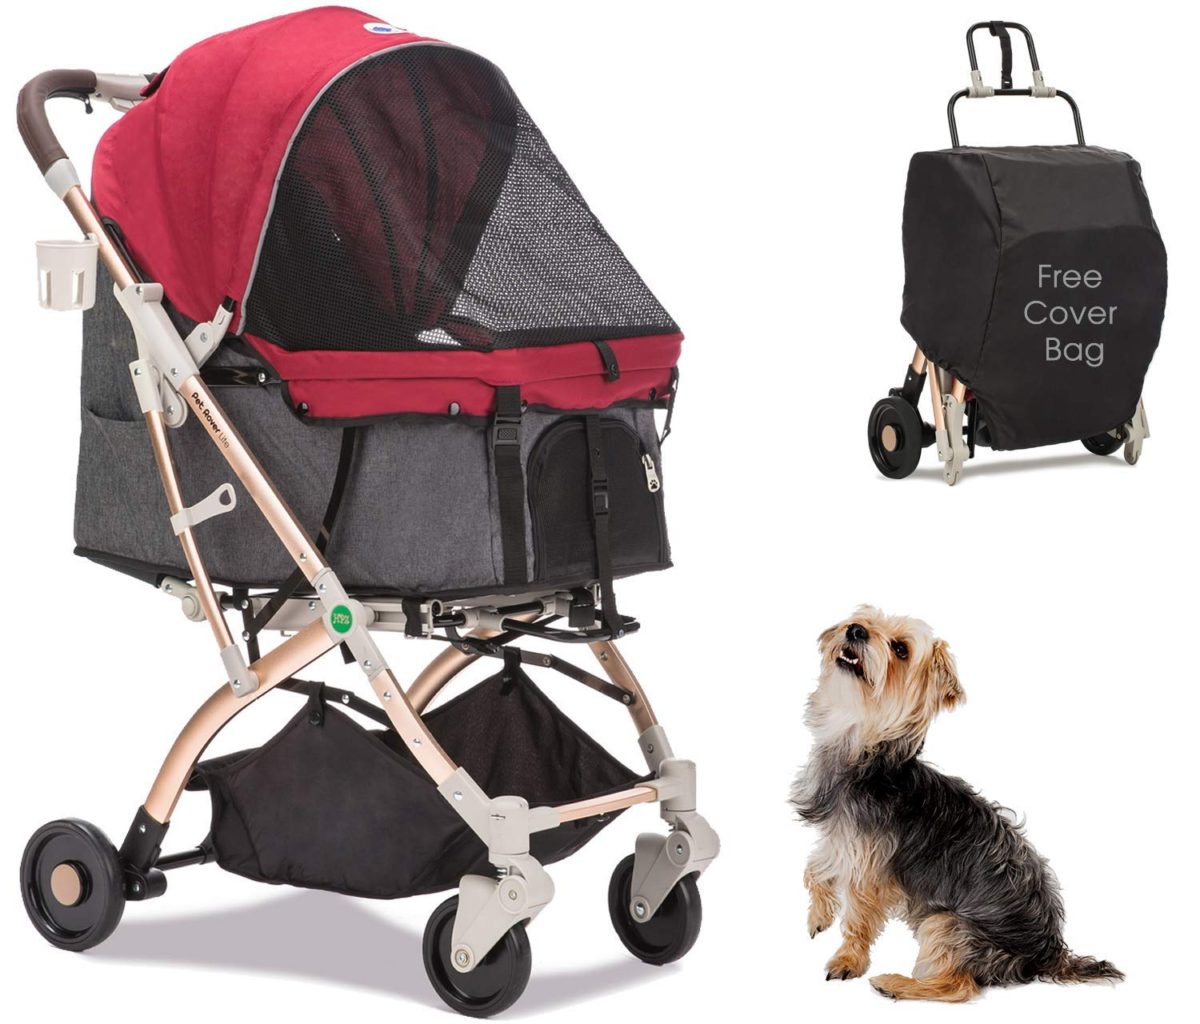 HPZ Pet Rover Lite Premium Light-Weight Dog/Cat/Pet Stroller 1-HAND QUICK FOLD/UNFOLD ★ The stroller could be folded and unfolded in simply seconds with one hand solely, so you may open or shut it effortlessly. A FREE cowl bag is included to retailer the stroller.